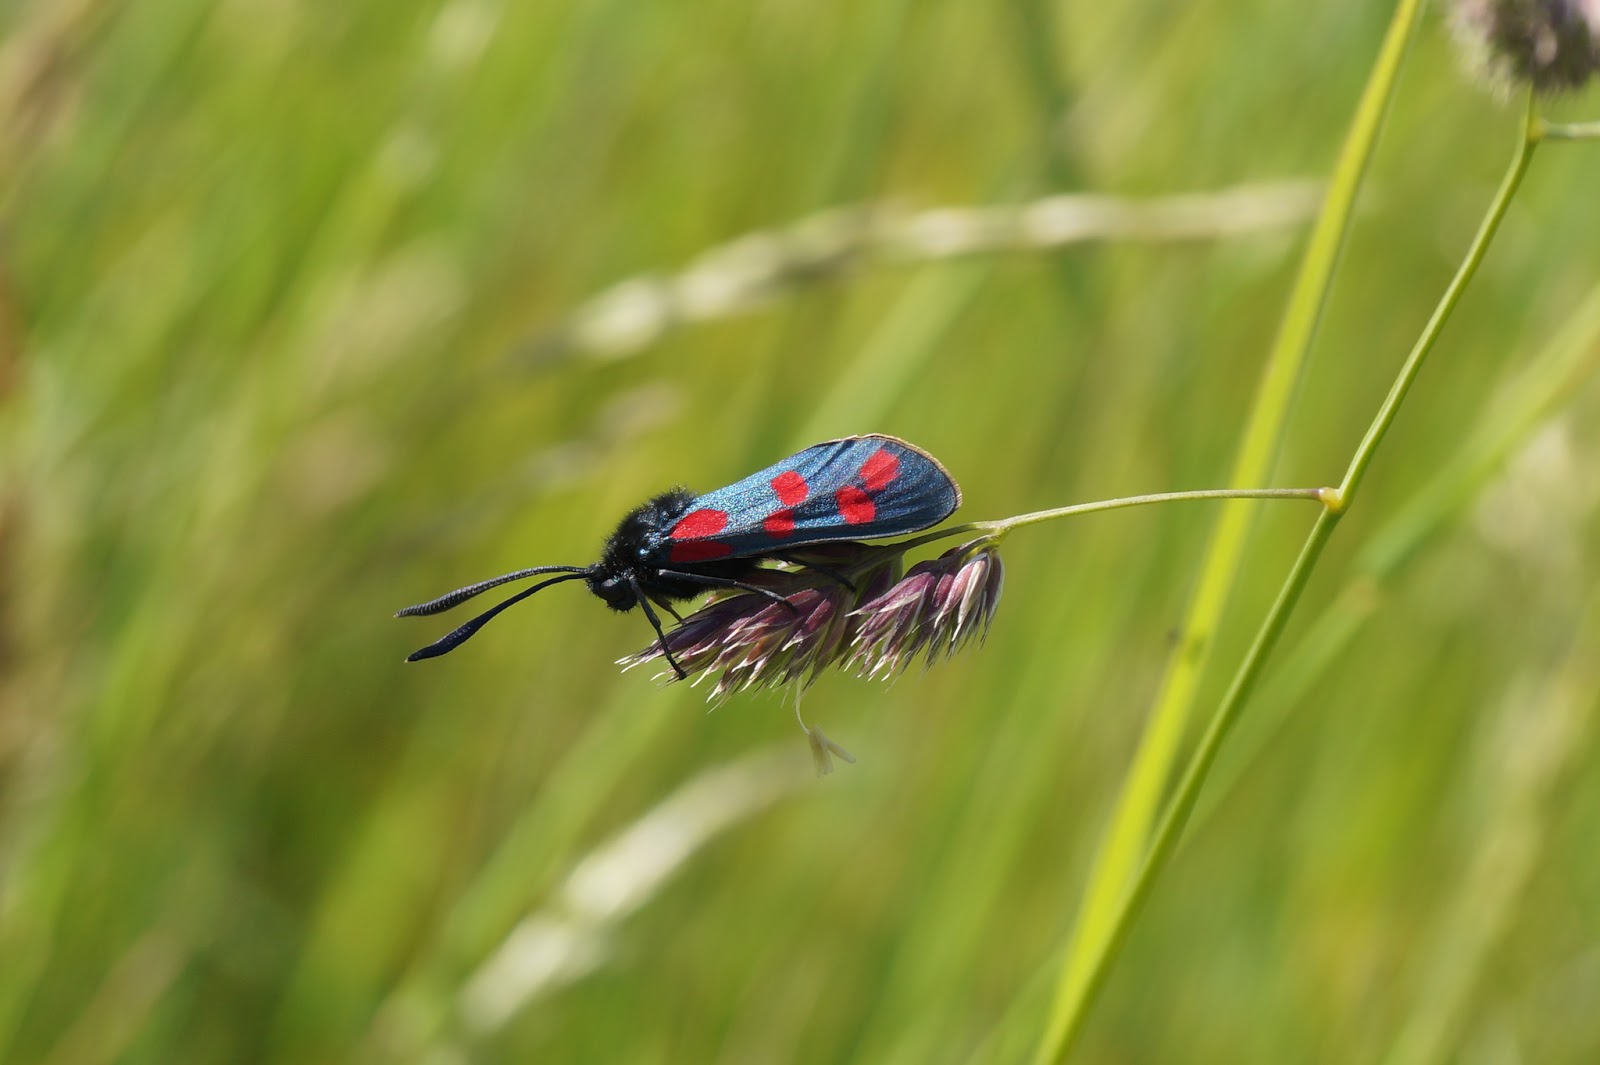 Hairy, black moth with long antennae with a clubbed end, and narrow, blue-speckled wings with bright red spots, with a bright yellowish green background consisting of out-of-focus grass